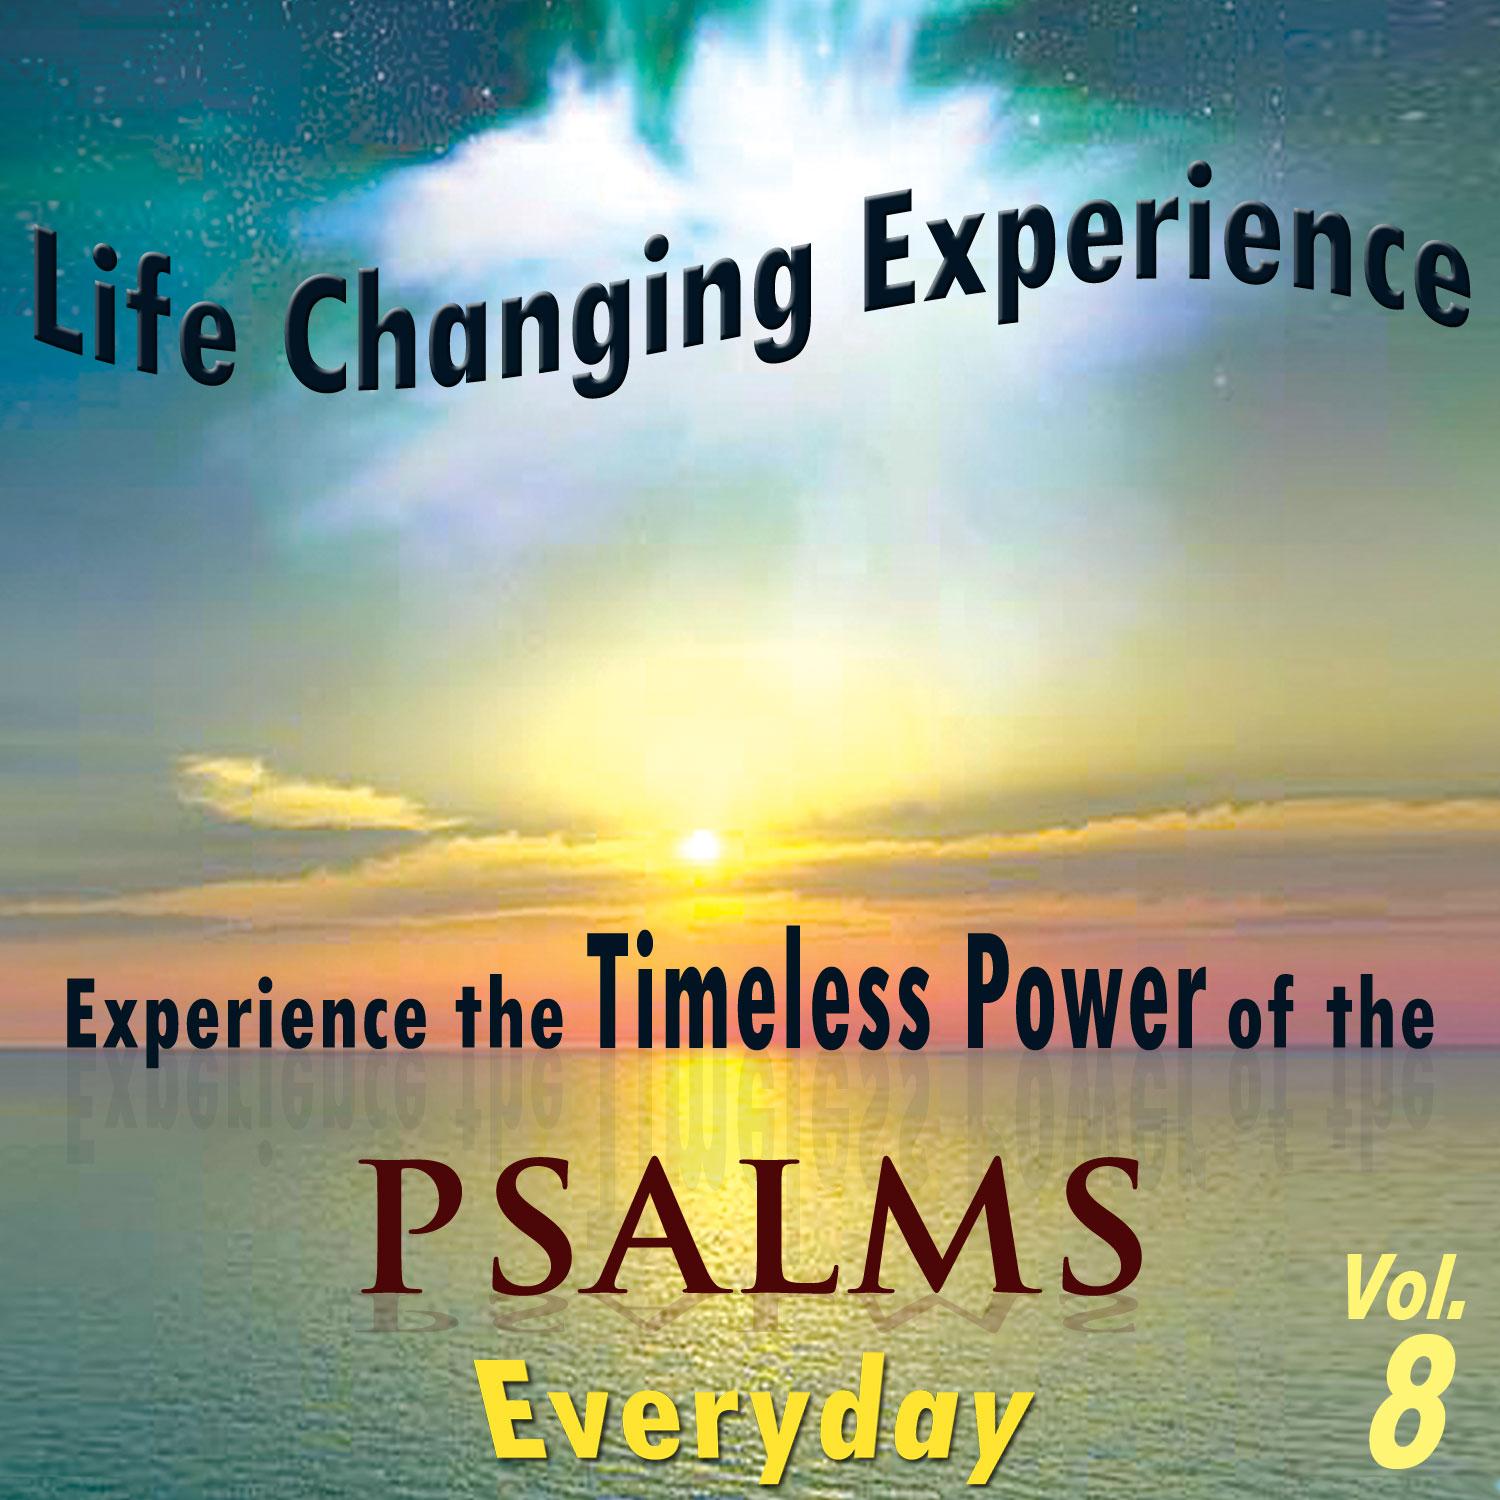 Life Changing Experience, Experience the Timeless Power of the Psalms Everyday, Vol. 8